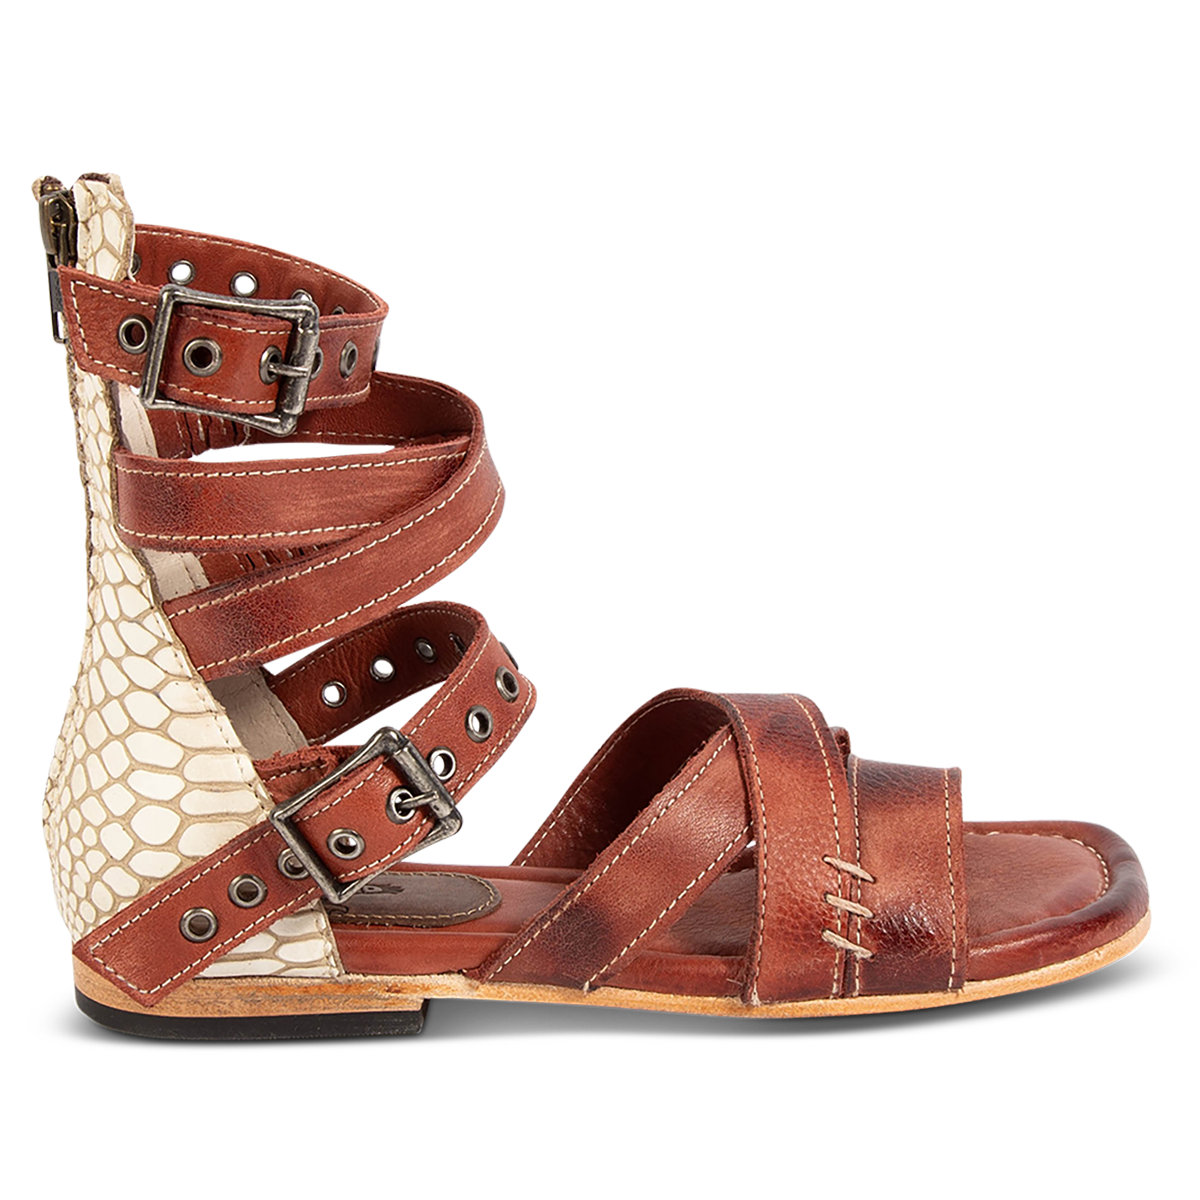 FREEBIRD women's Sydney rust multi leather gladiator sandal with adjustable leather straps and an abstract back panel